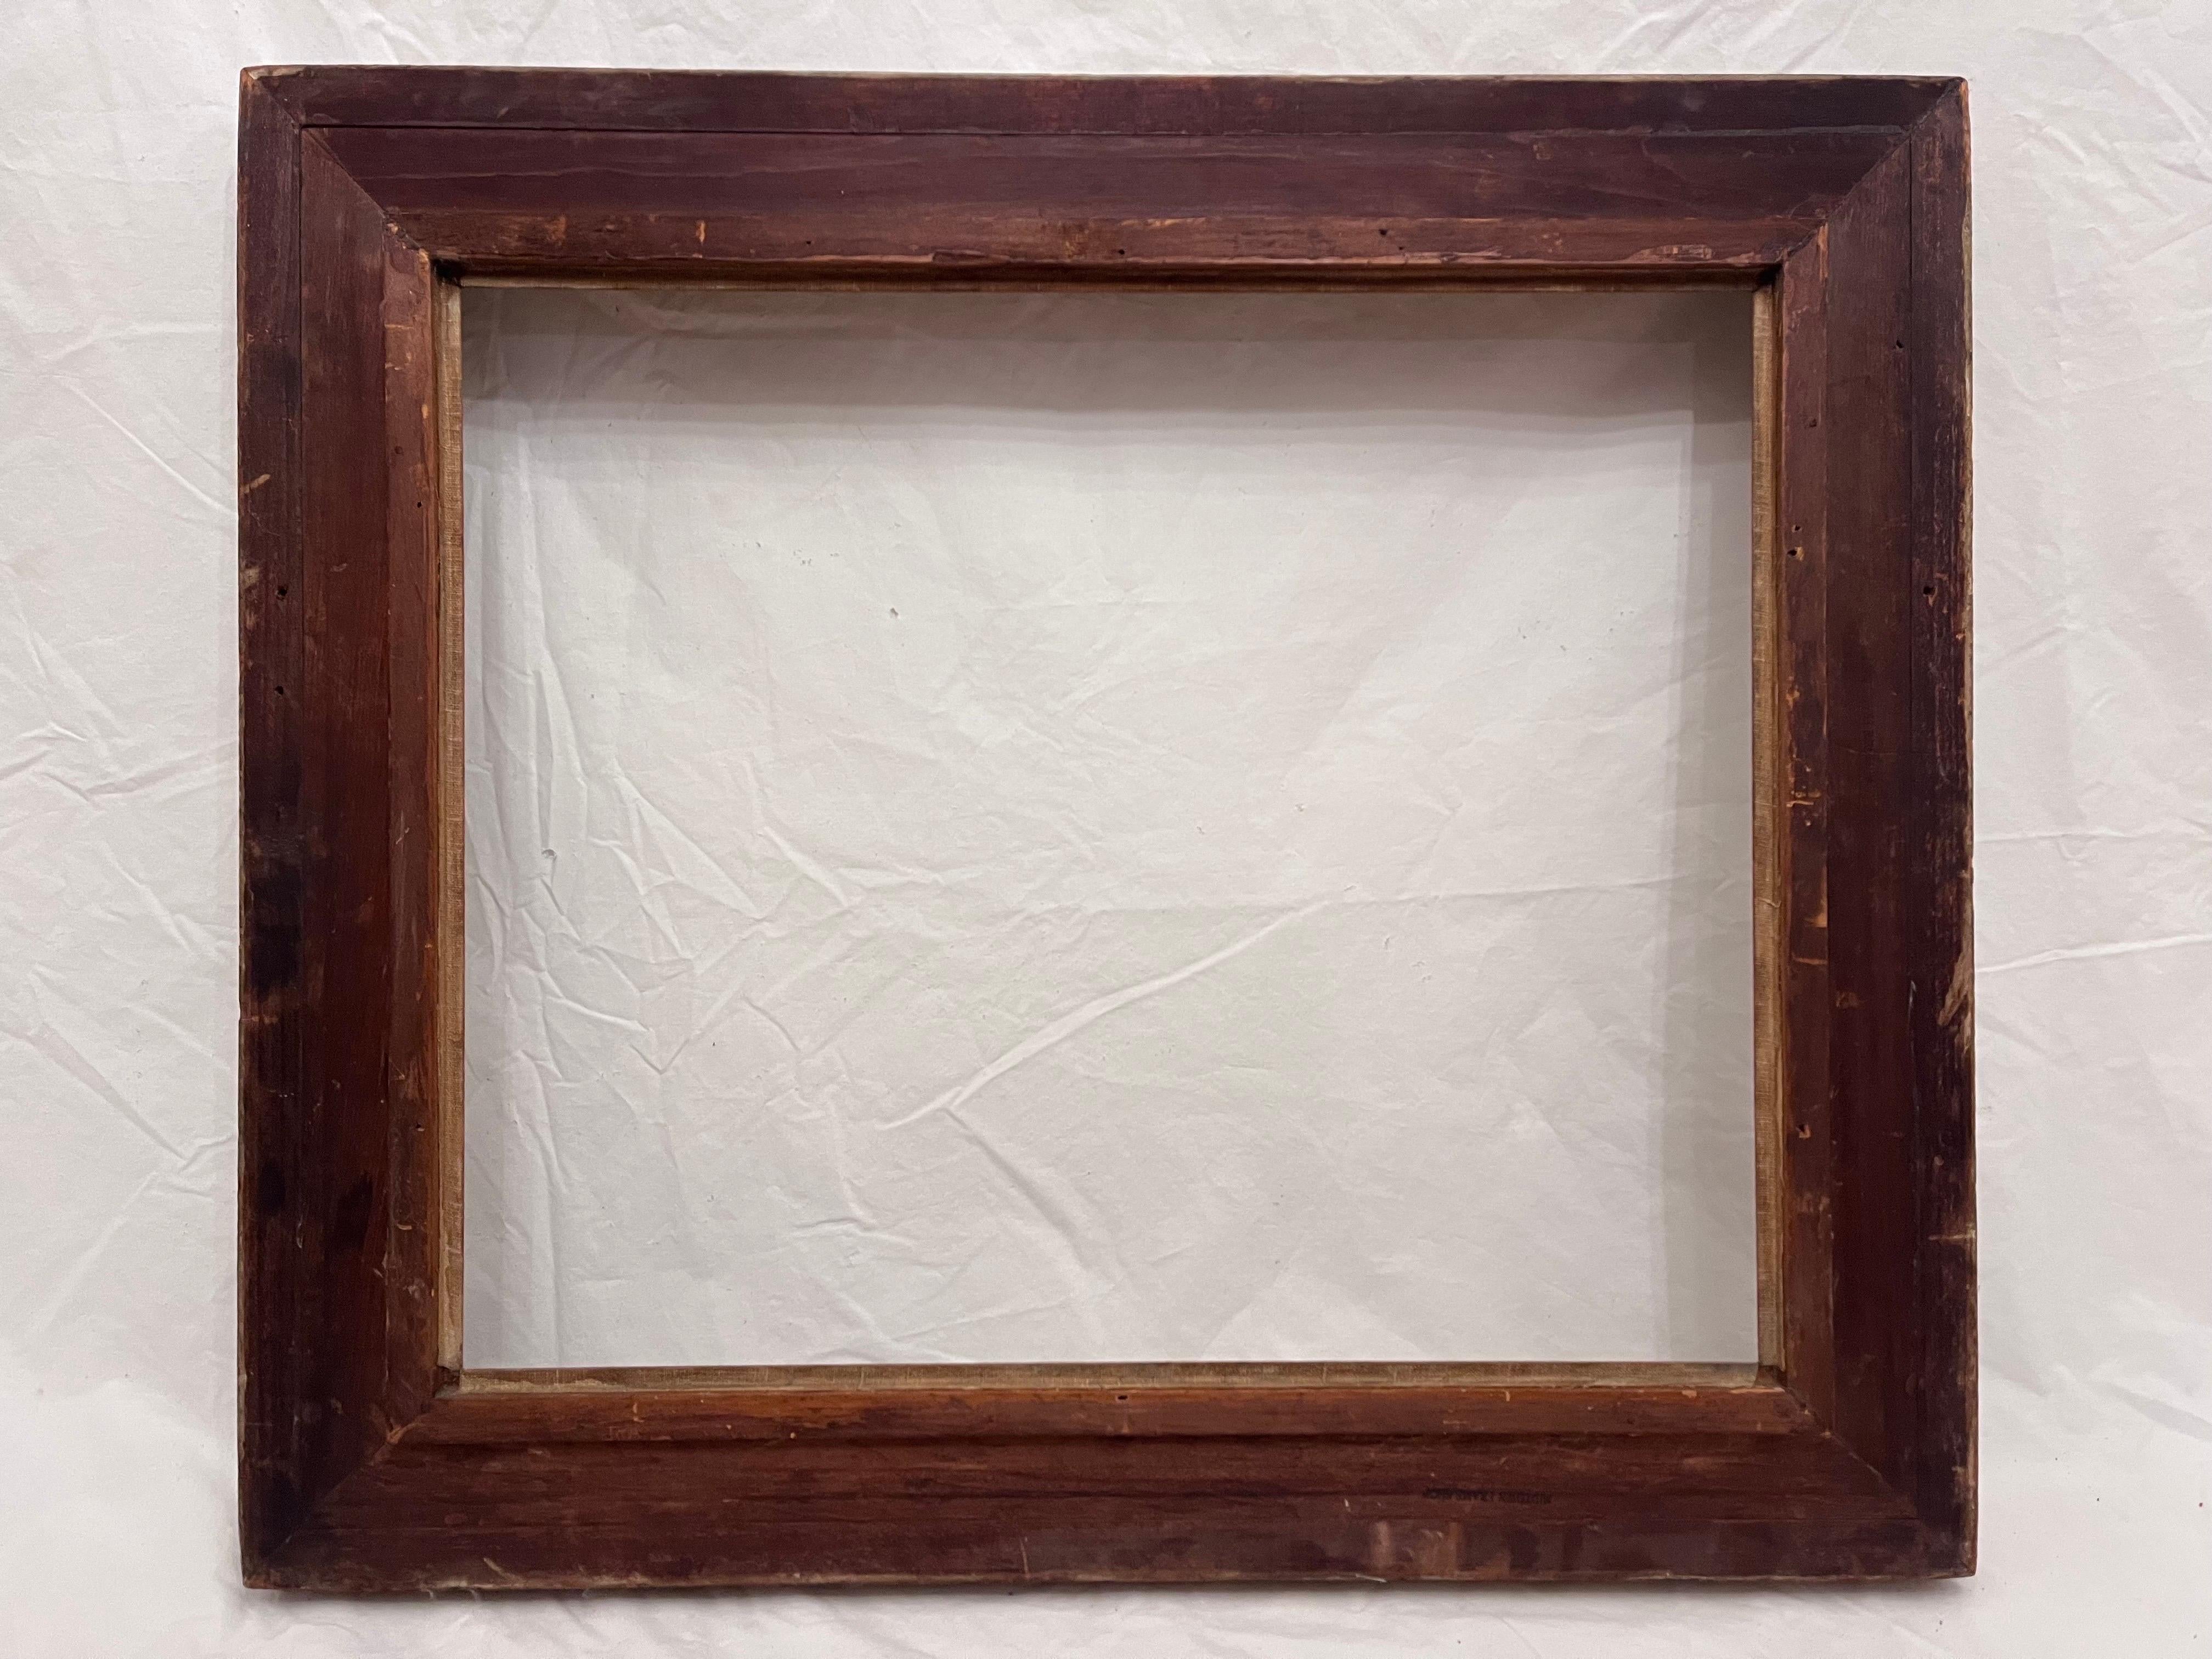 Important 20th C Hand Carved Modernist Picture Frame Midtown Frame Shop 24 x 20 1